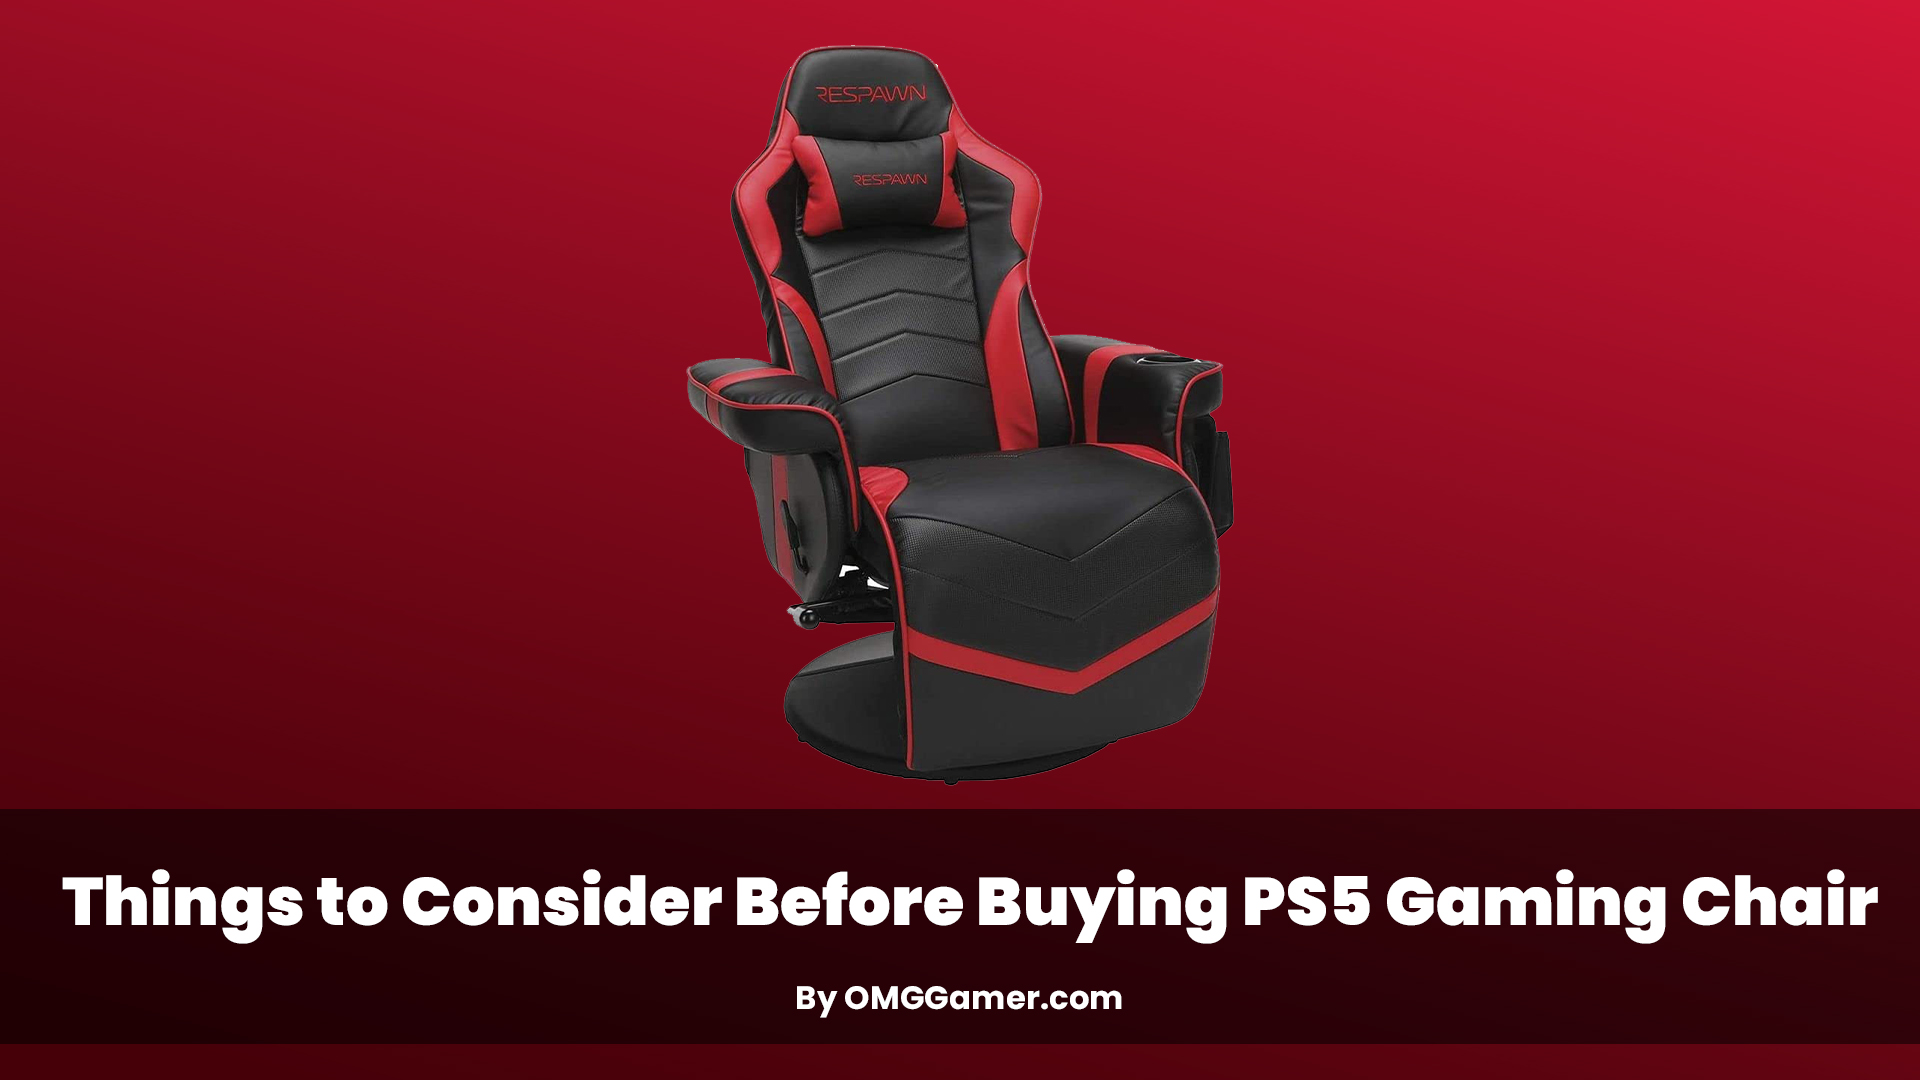 Things to Consider Before Buying PS5 Gaming Chair